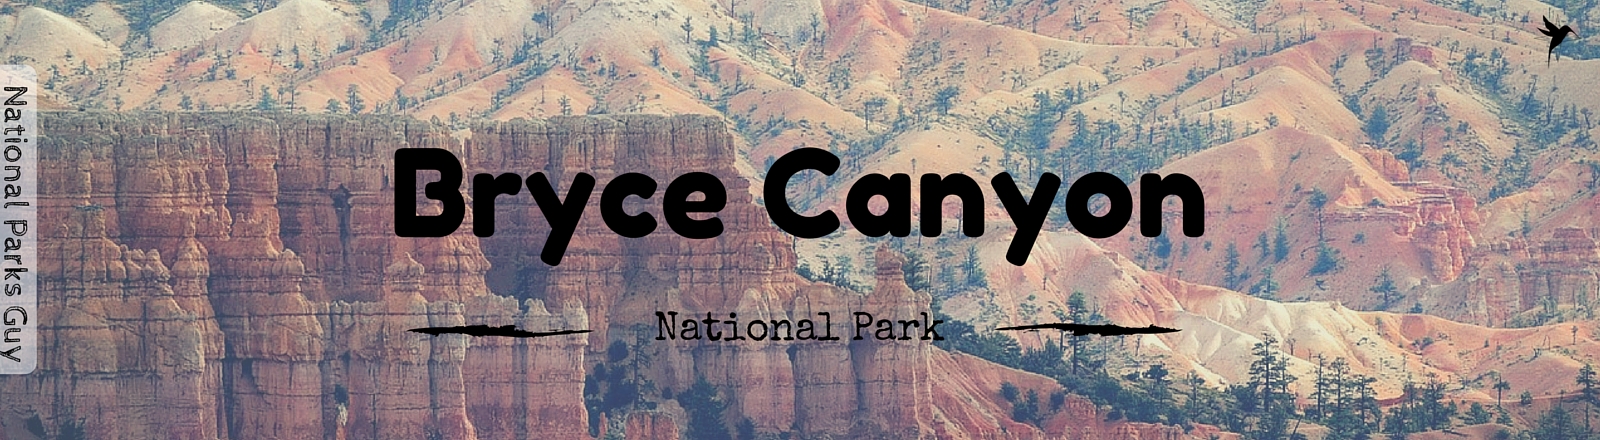 Bryce Canyon National Park, USA, National Parks Guy, Stories, Tales, Adventures, Wildlife